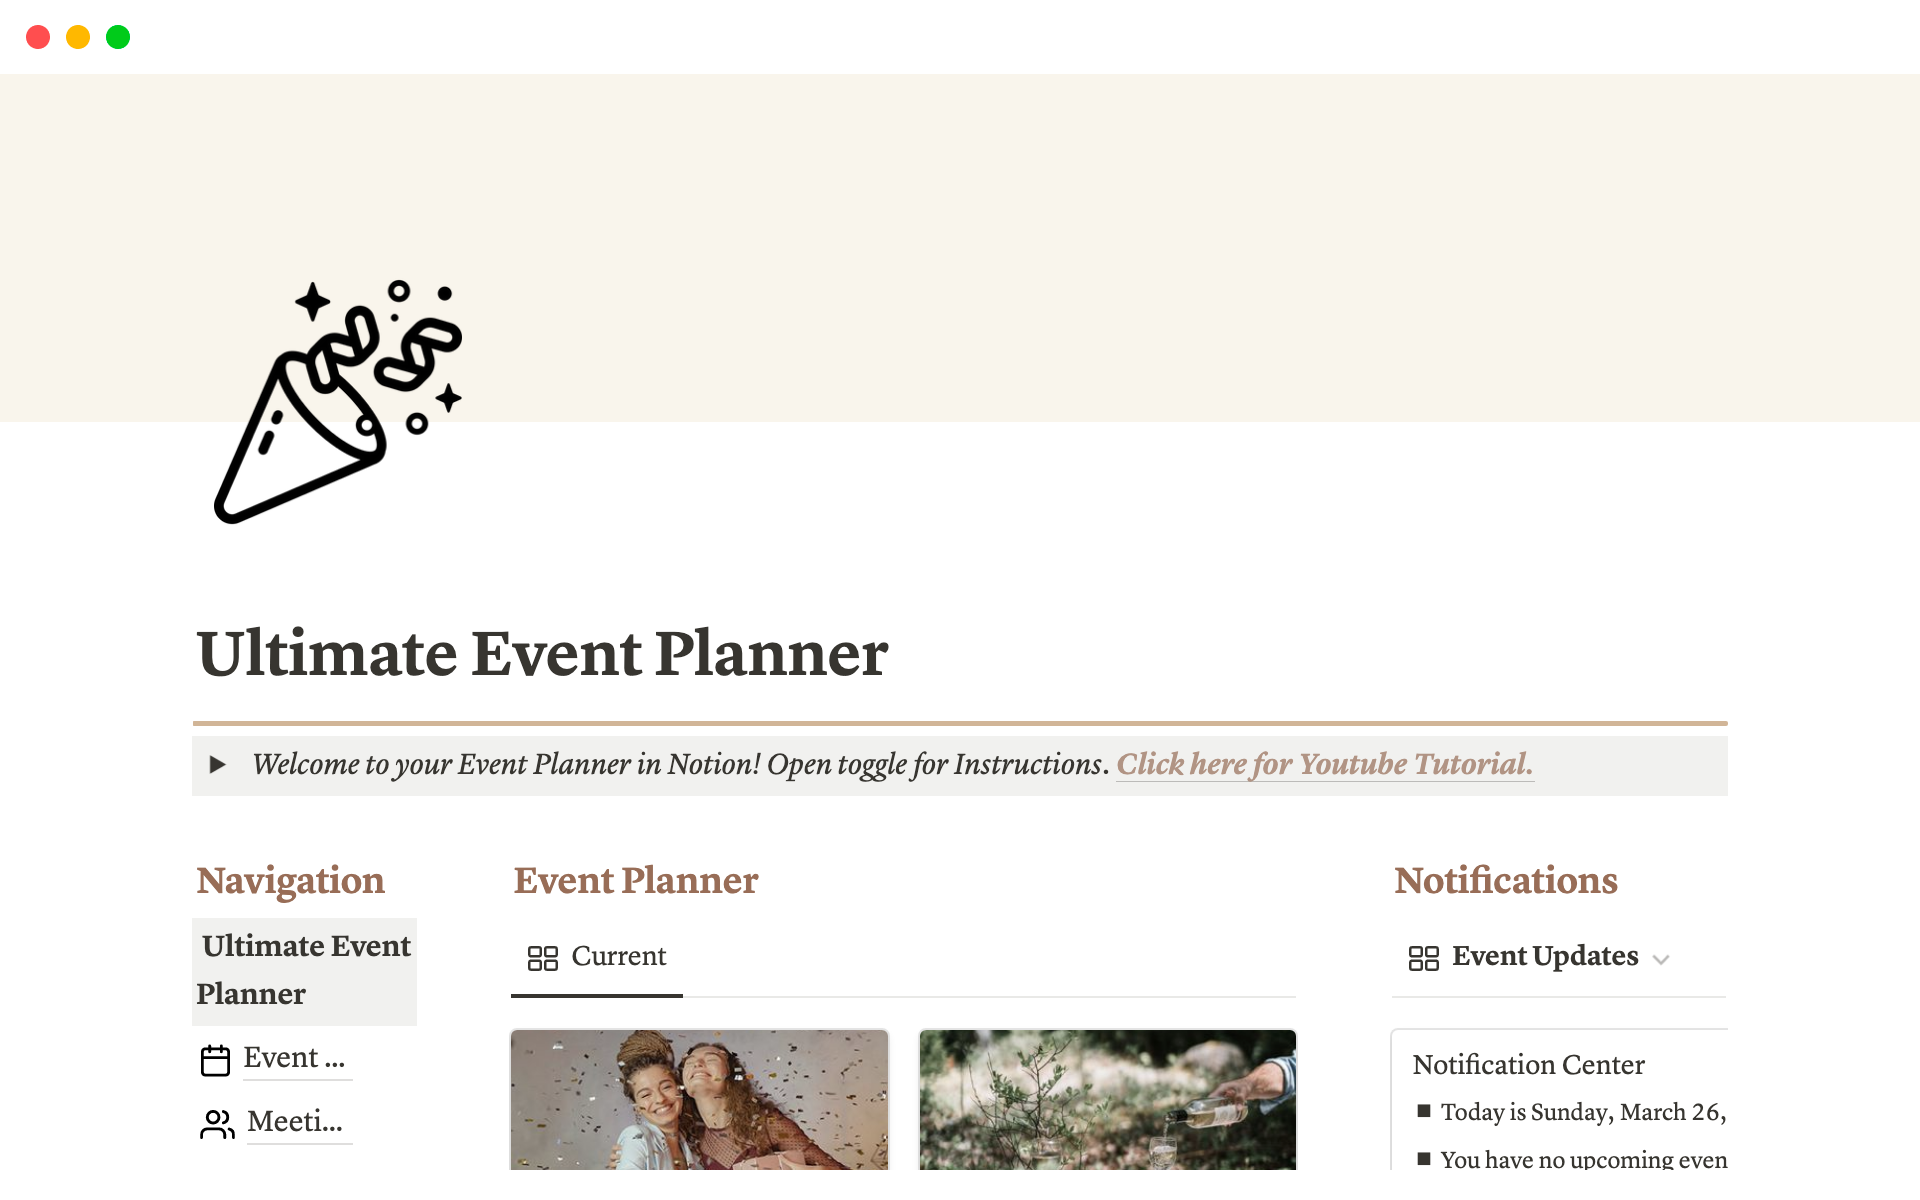 Plan your multiple events in one template and streamline event planning from start to finish.